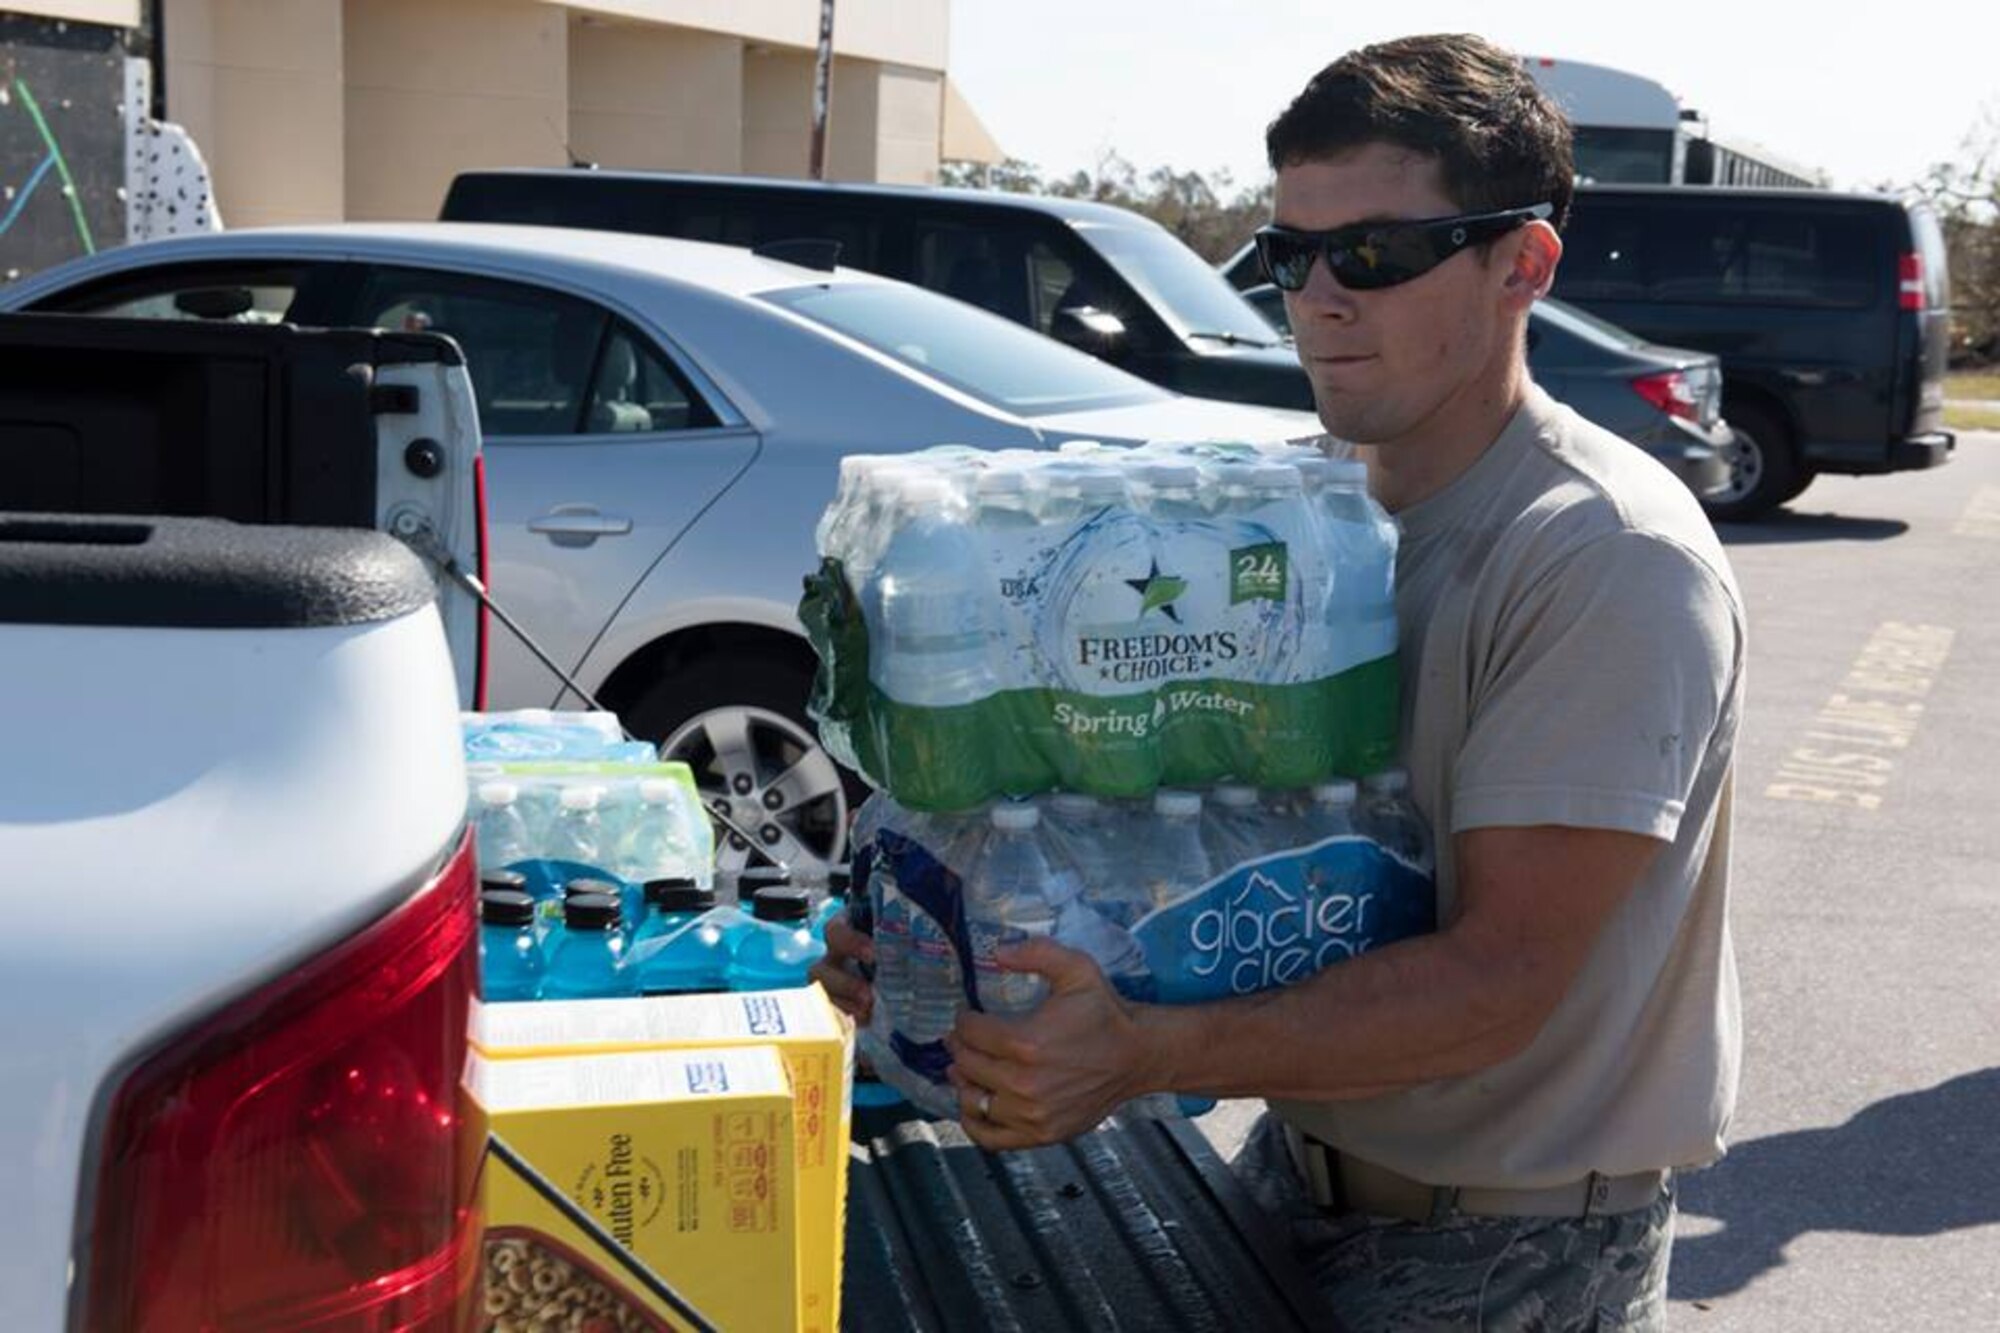 1st Lt. Adam Kriete, 337th Air Control Squadron student, delivers food and water to Tyndall AFB residents at the Youth Center at Tyndall Air Force Base Fla., Oct. 19, 2018. Tyndall AFB was damaged by Hurricane Michael which displaced approximately 11,000 people, to include the Kriete family who travelled back to Tyndall during a five hour window to recover their belongings.